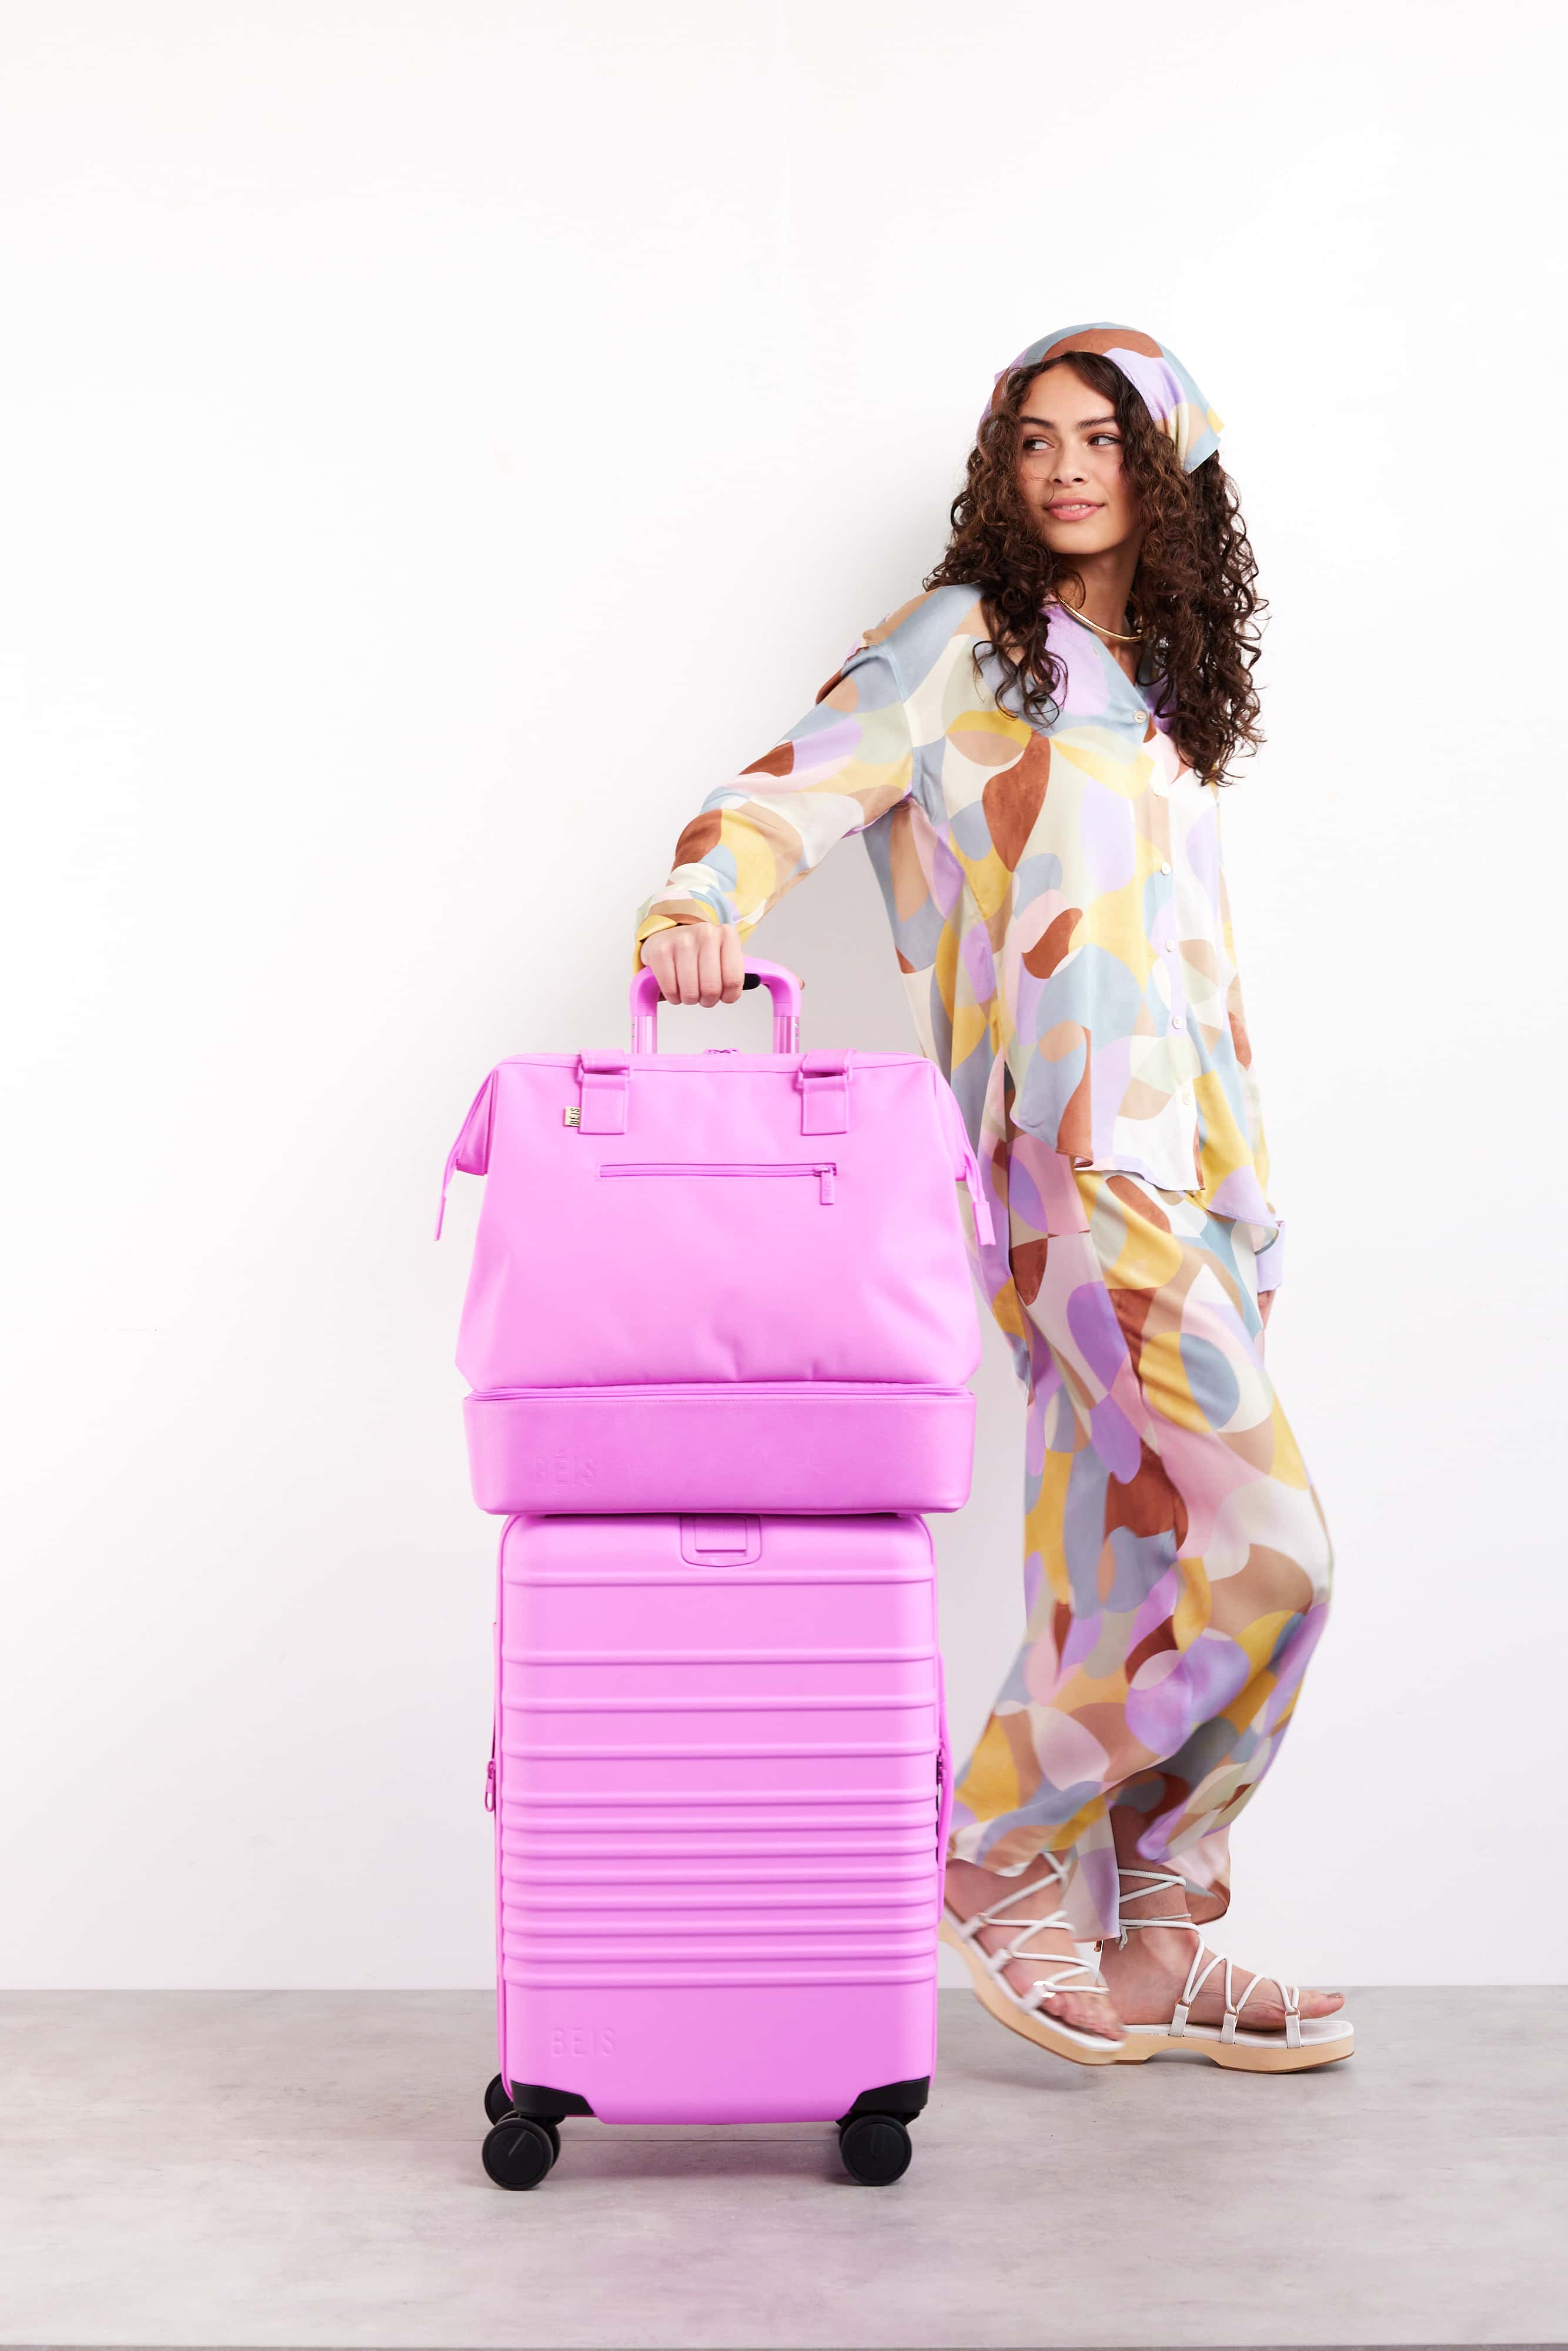 BÉIS launches collapsible luggage with Shay Mitchell